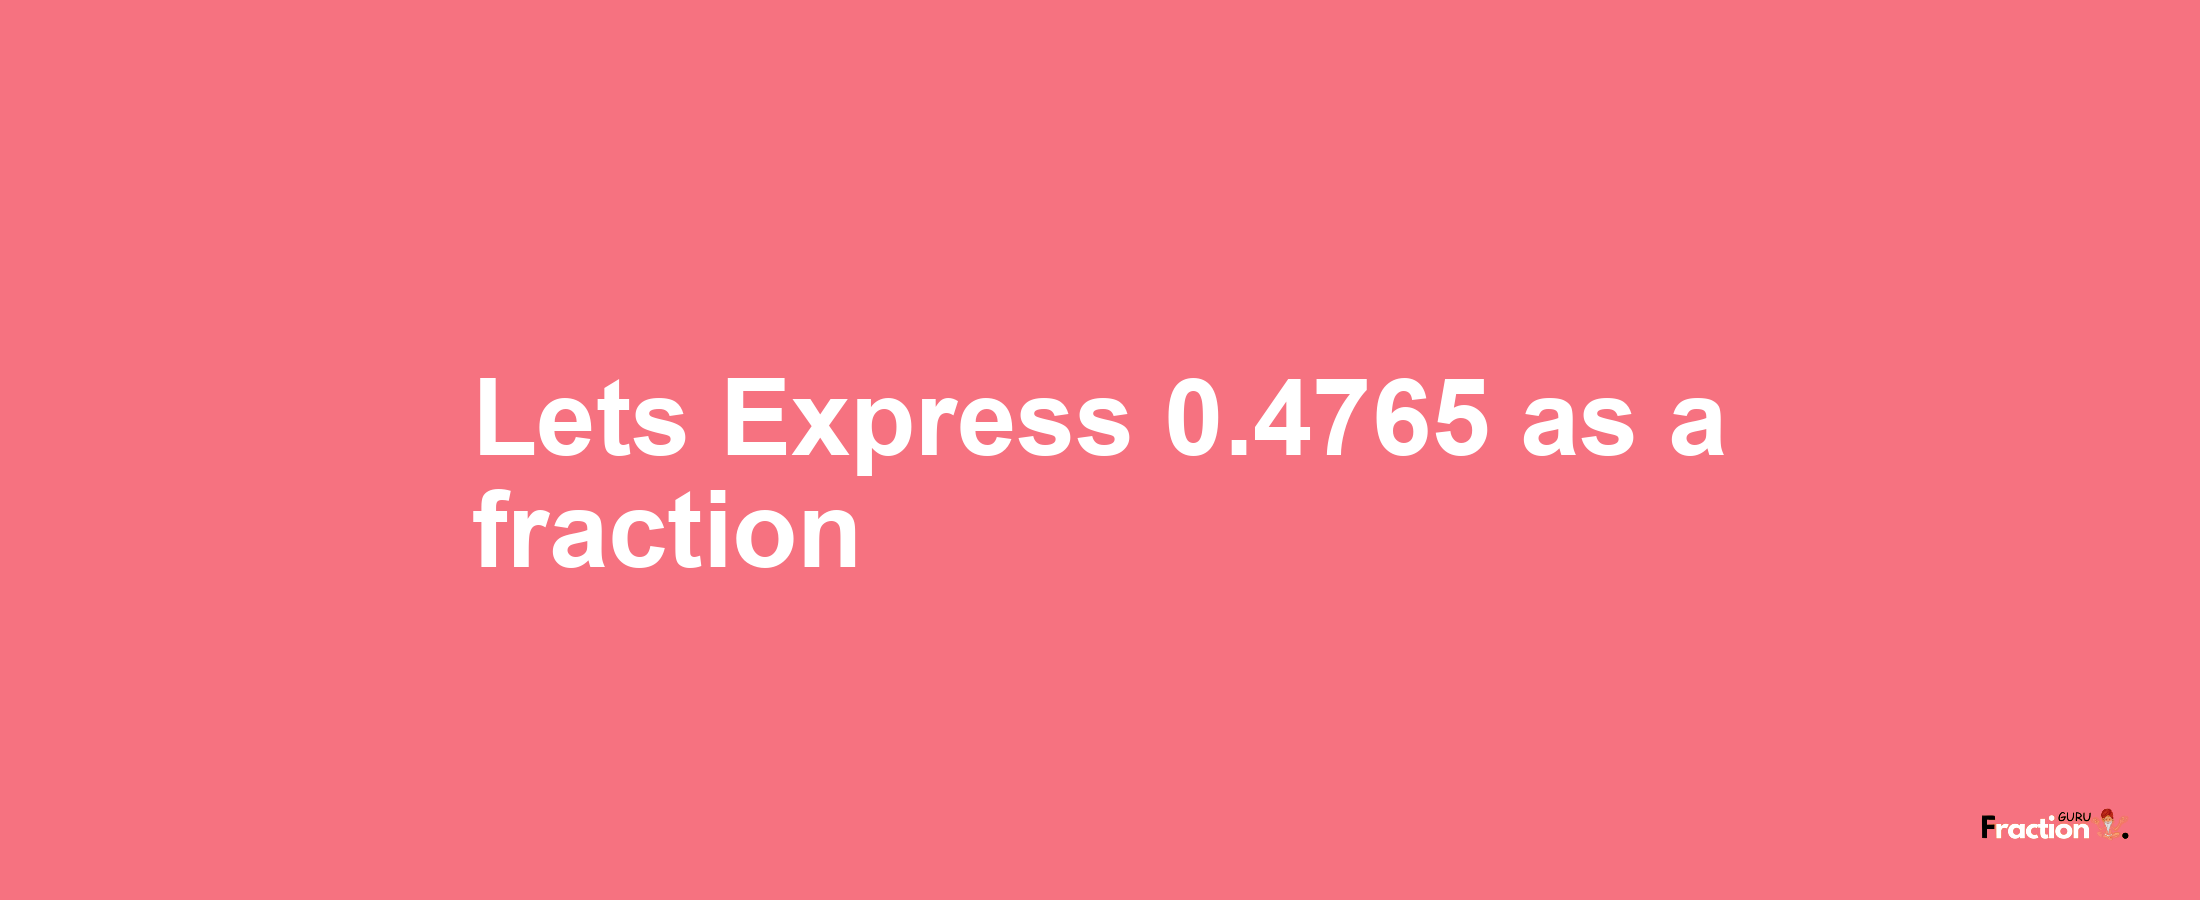 Lets Express 0.4765 as afraction